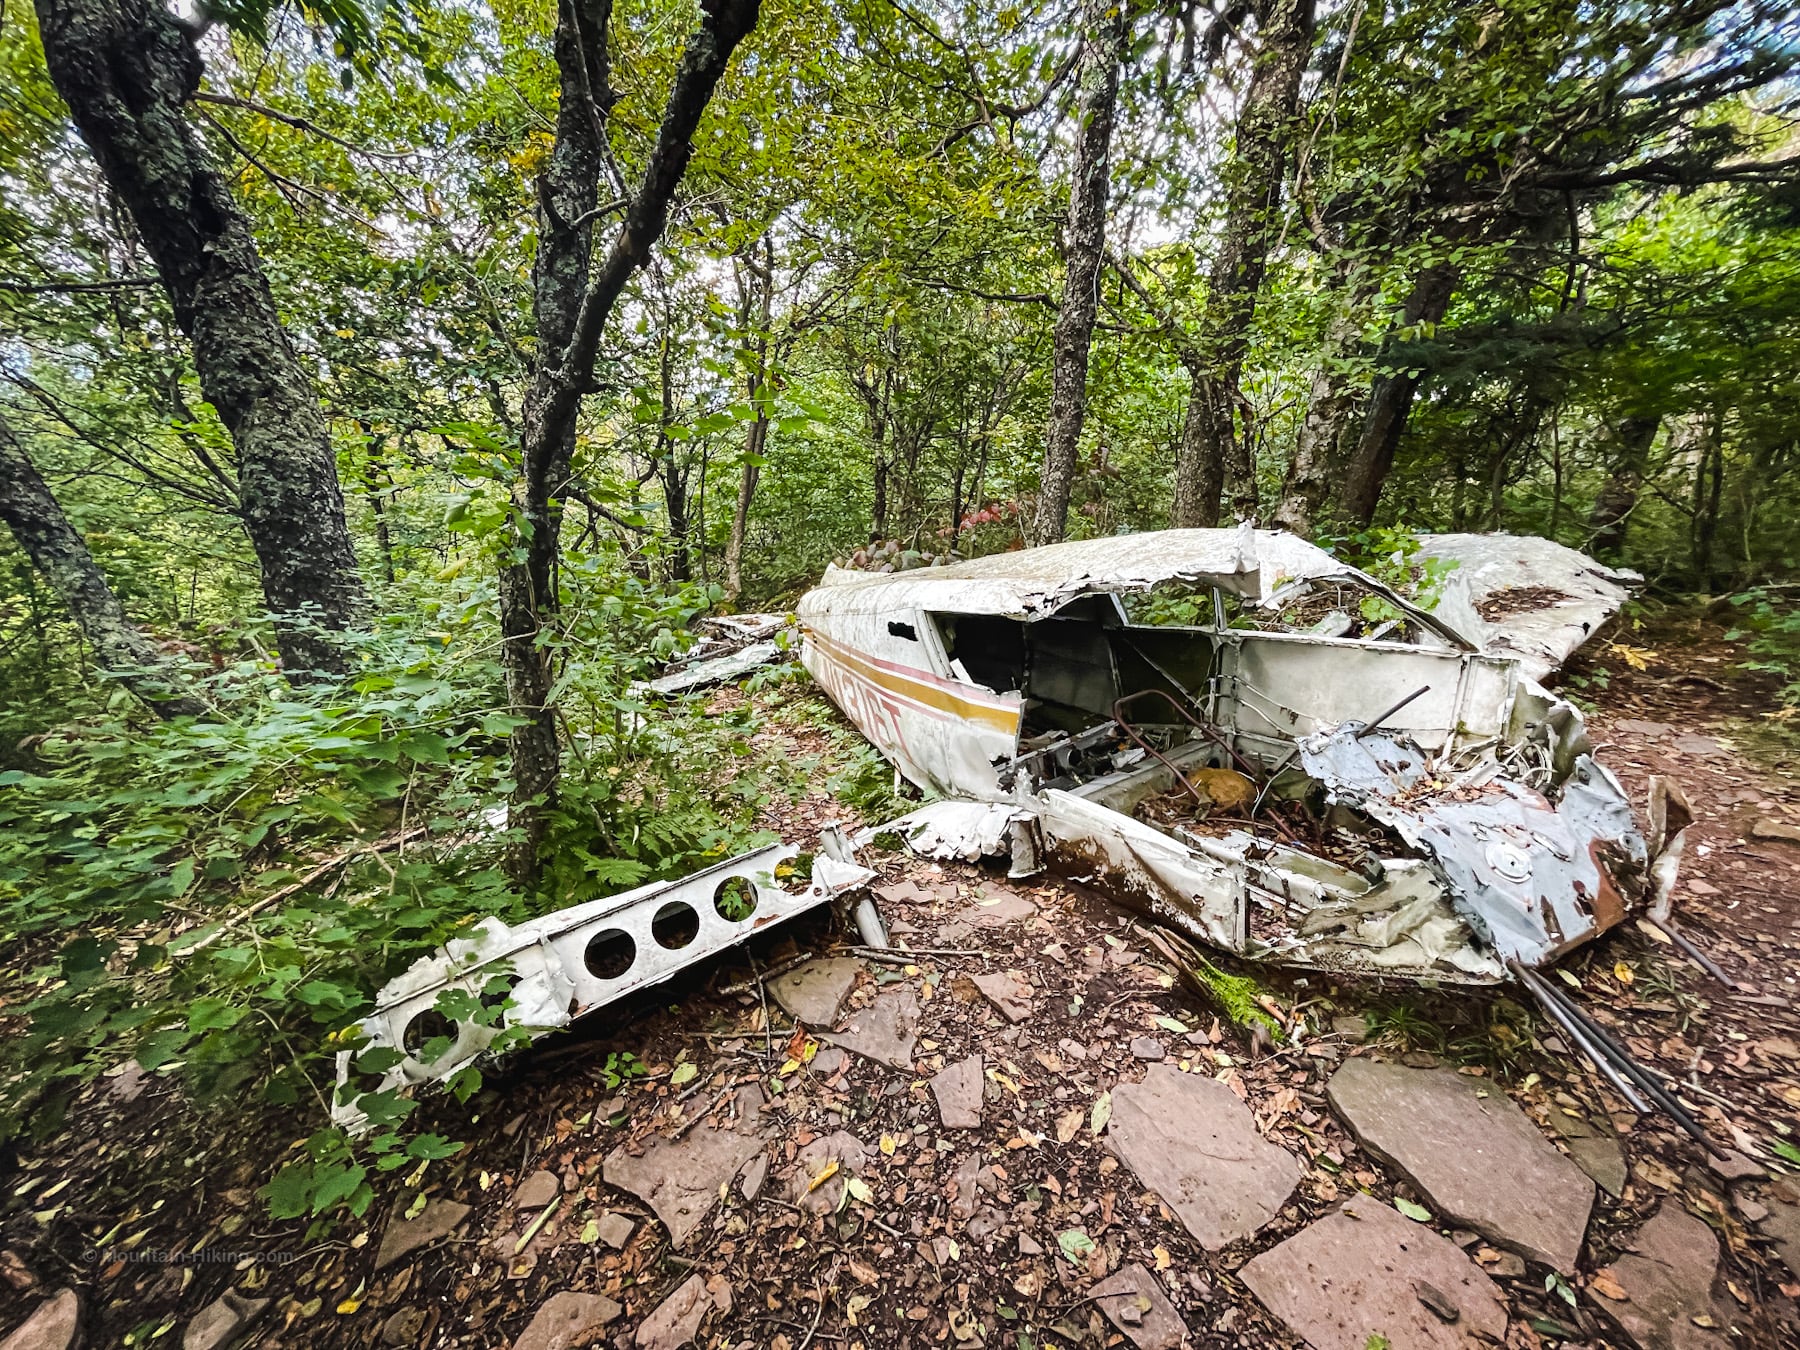 stoppel point plane crash in woods